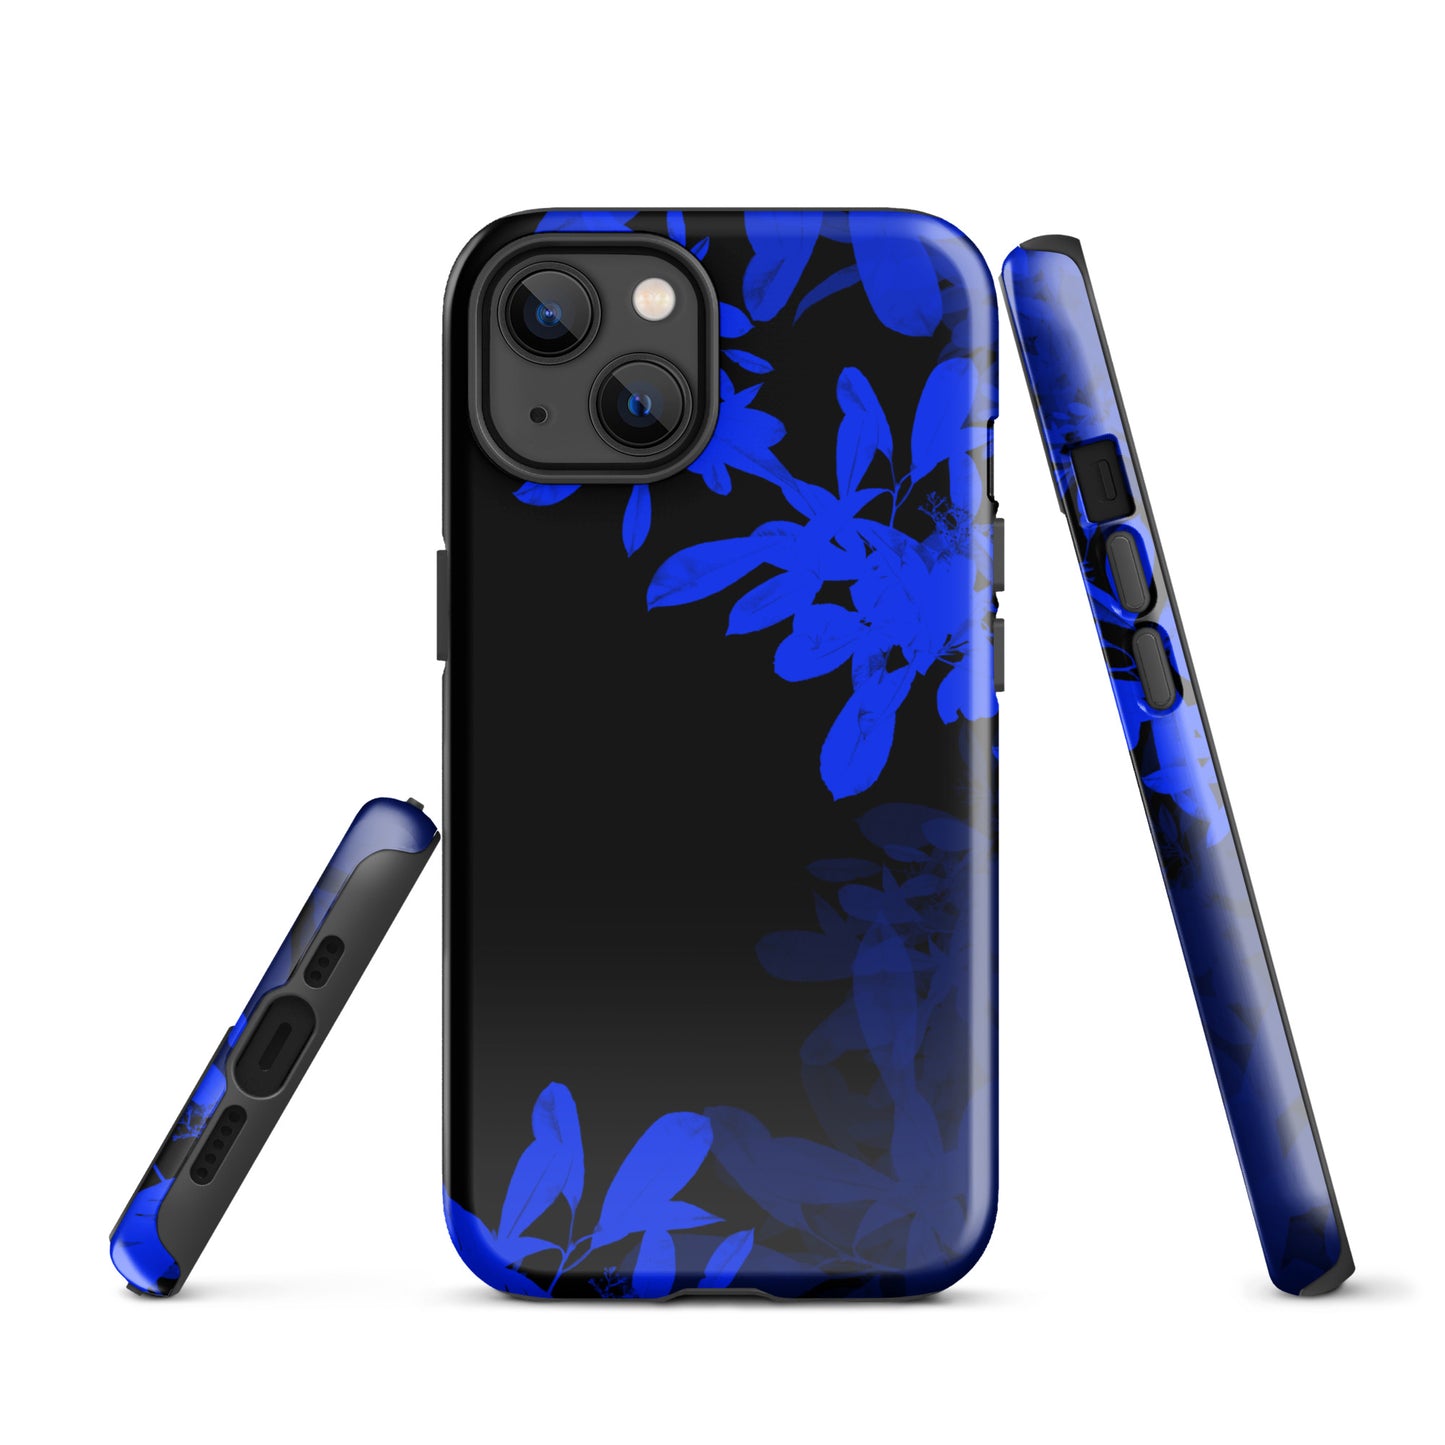 A Night Blue Plant Case for the iPhone 13 